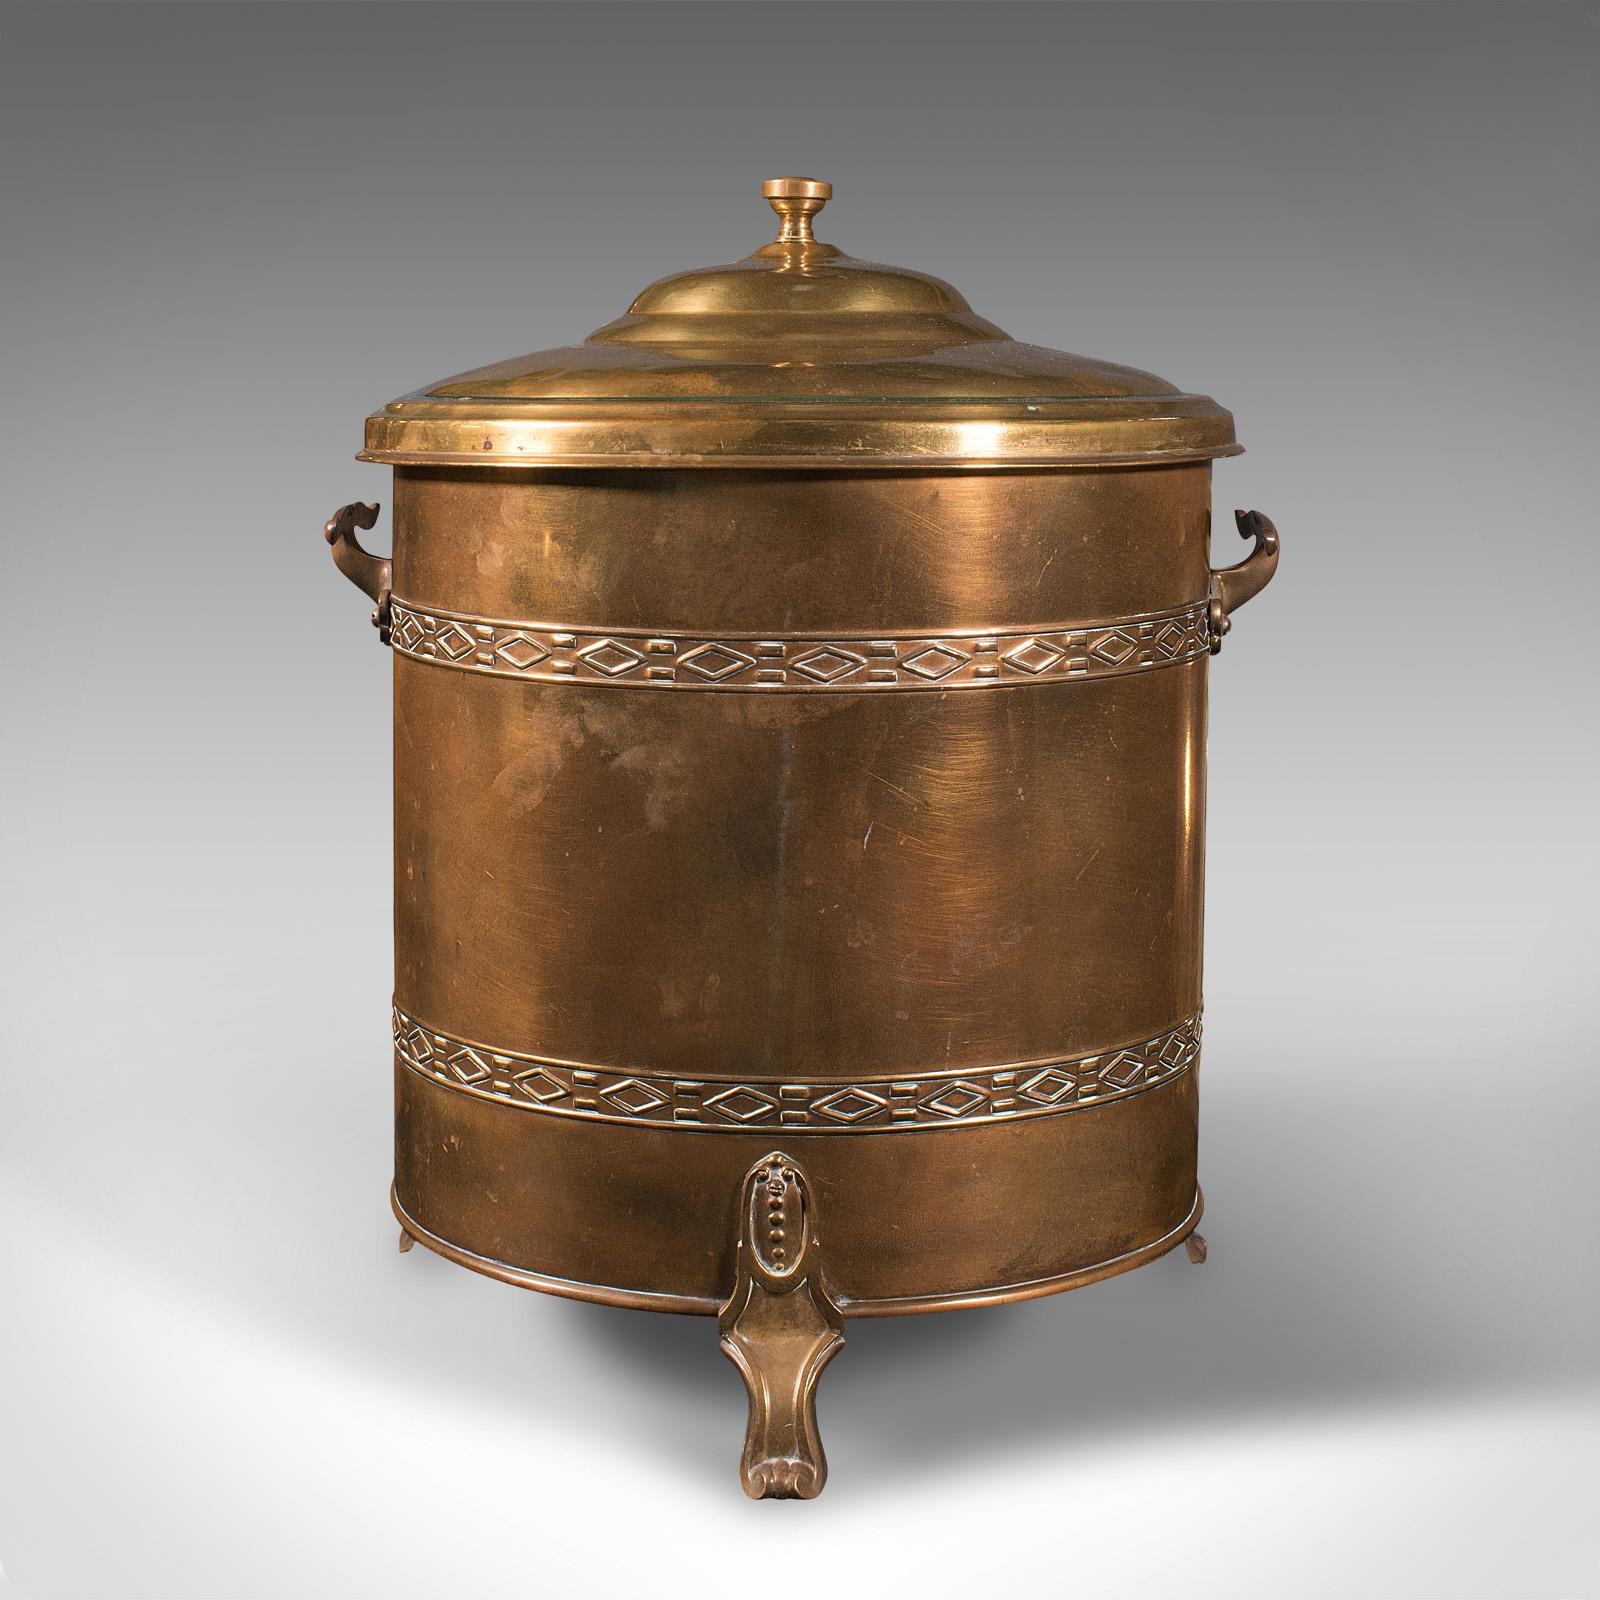 This is an antique fireside log bin. An English, brass coal bucket with lid, dating to the Edwardian period, circa 1910.

Attractive bin sure to grace the fireside
Displays a desirable aged patina throughout
Brass presents appealing amber and